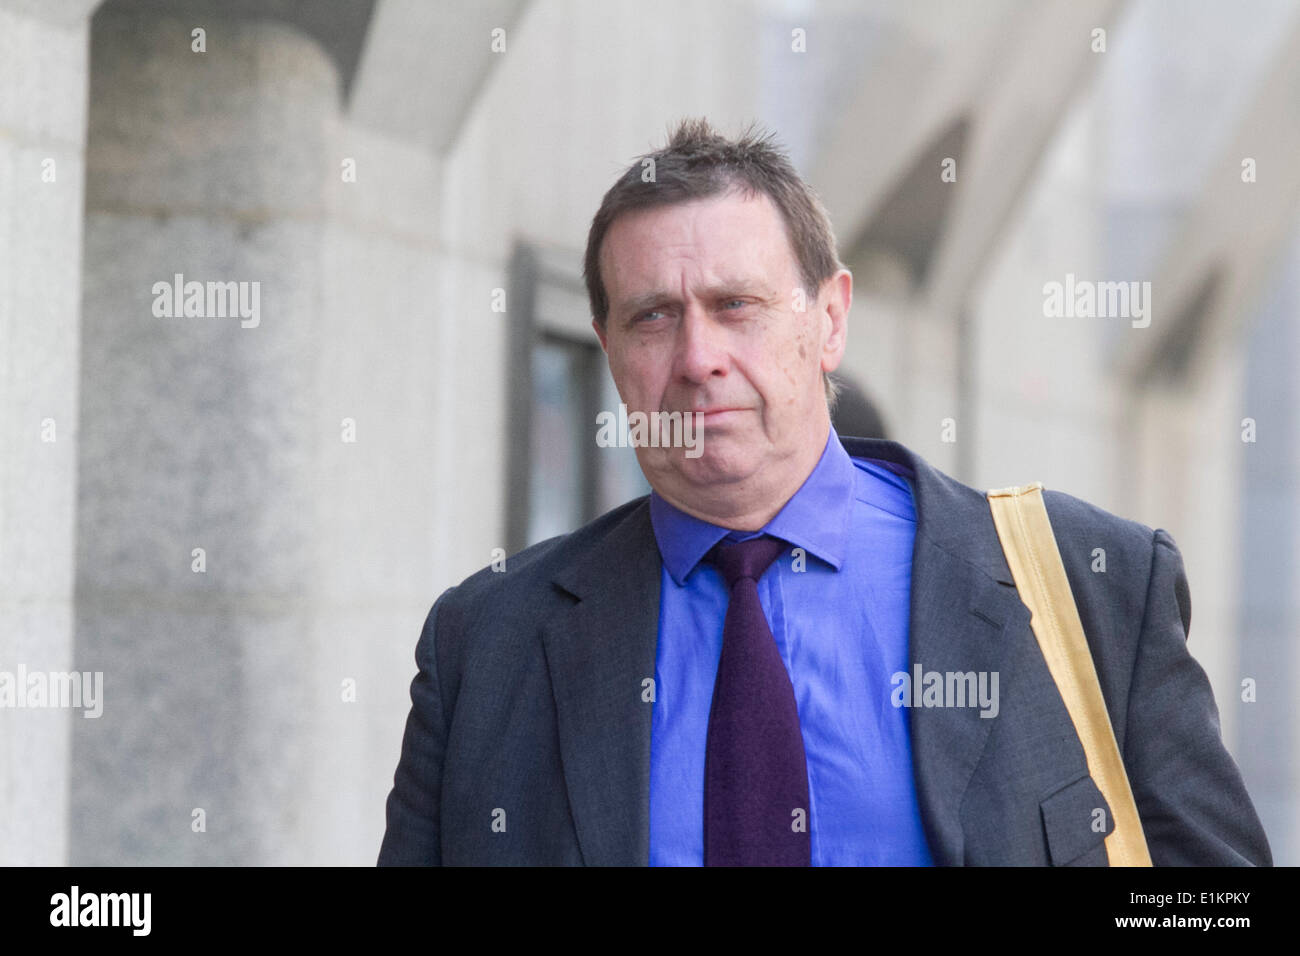 London UK. 6th June 2014. Former Royal editor at News of the world Clive Goodman  arrives at the Old Bailey as  the judge starts summing up after 7 months. Rebekah Brooks and other defendants including husband Charlie Brooks, Andy Coulson, Ian Edmonson, Clive Goodman;Cheryl Carter, Stuart Kuttner and Mark Hanna are charged in conspiracy to intercept the voice mails of celebrities and victims of crime and members of the British Royal Family Credit:  amer ghazzal/Alamy Live News Stock Photo